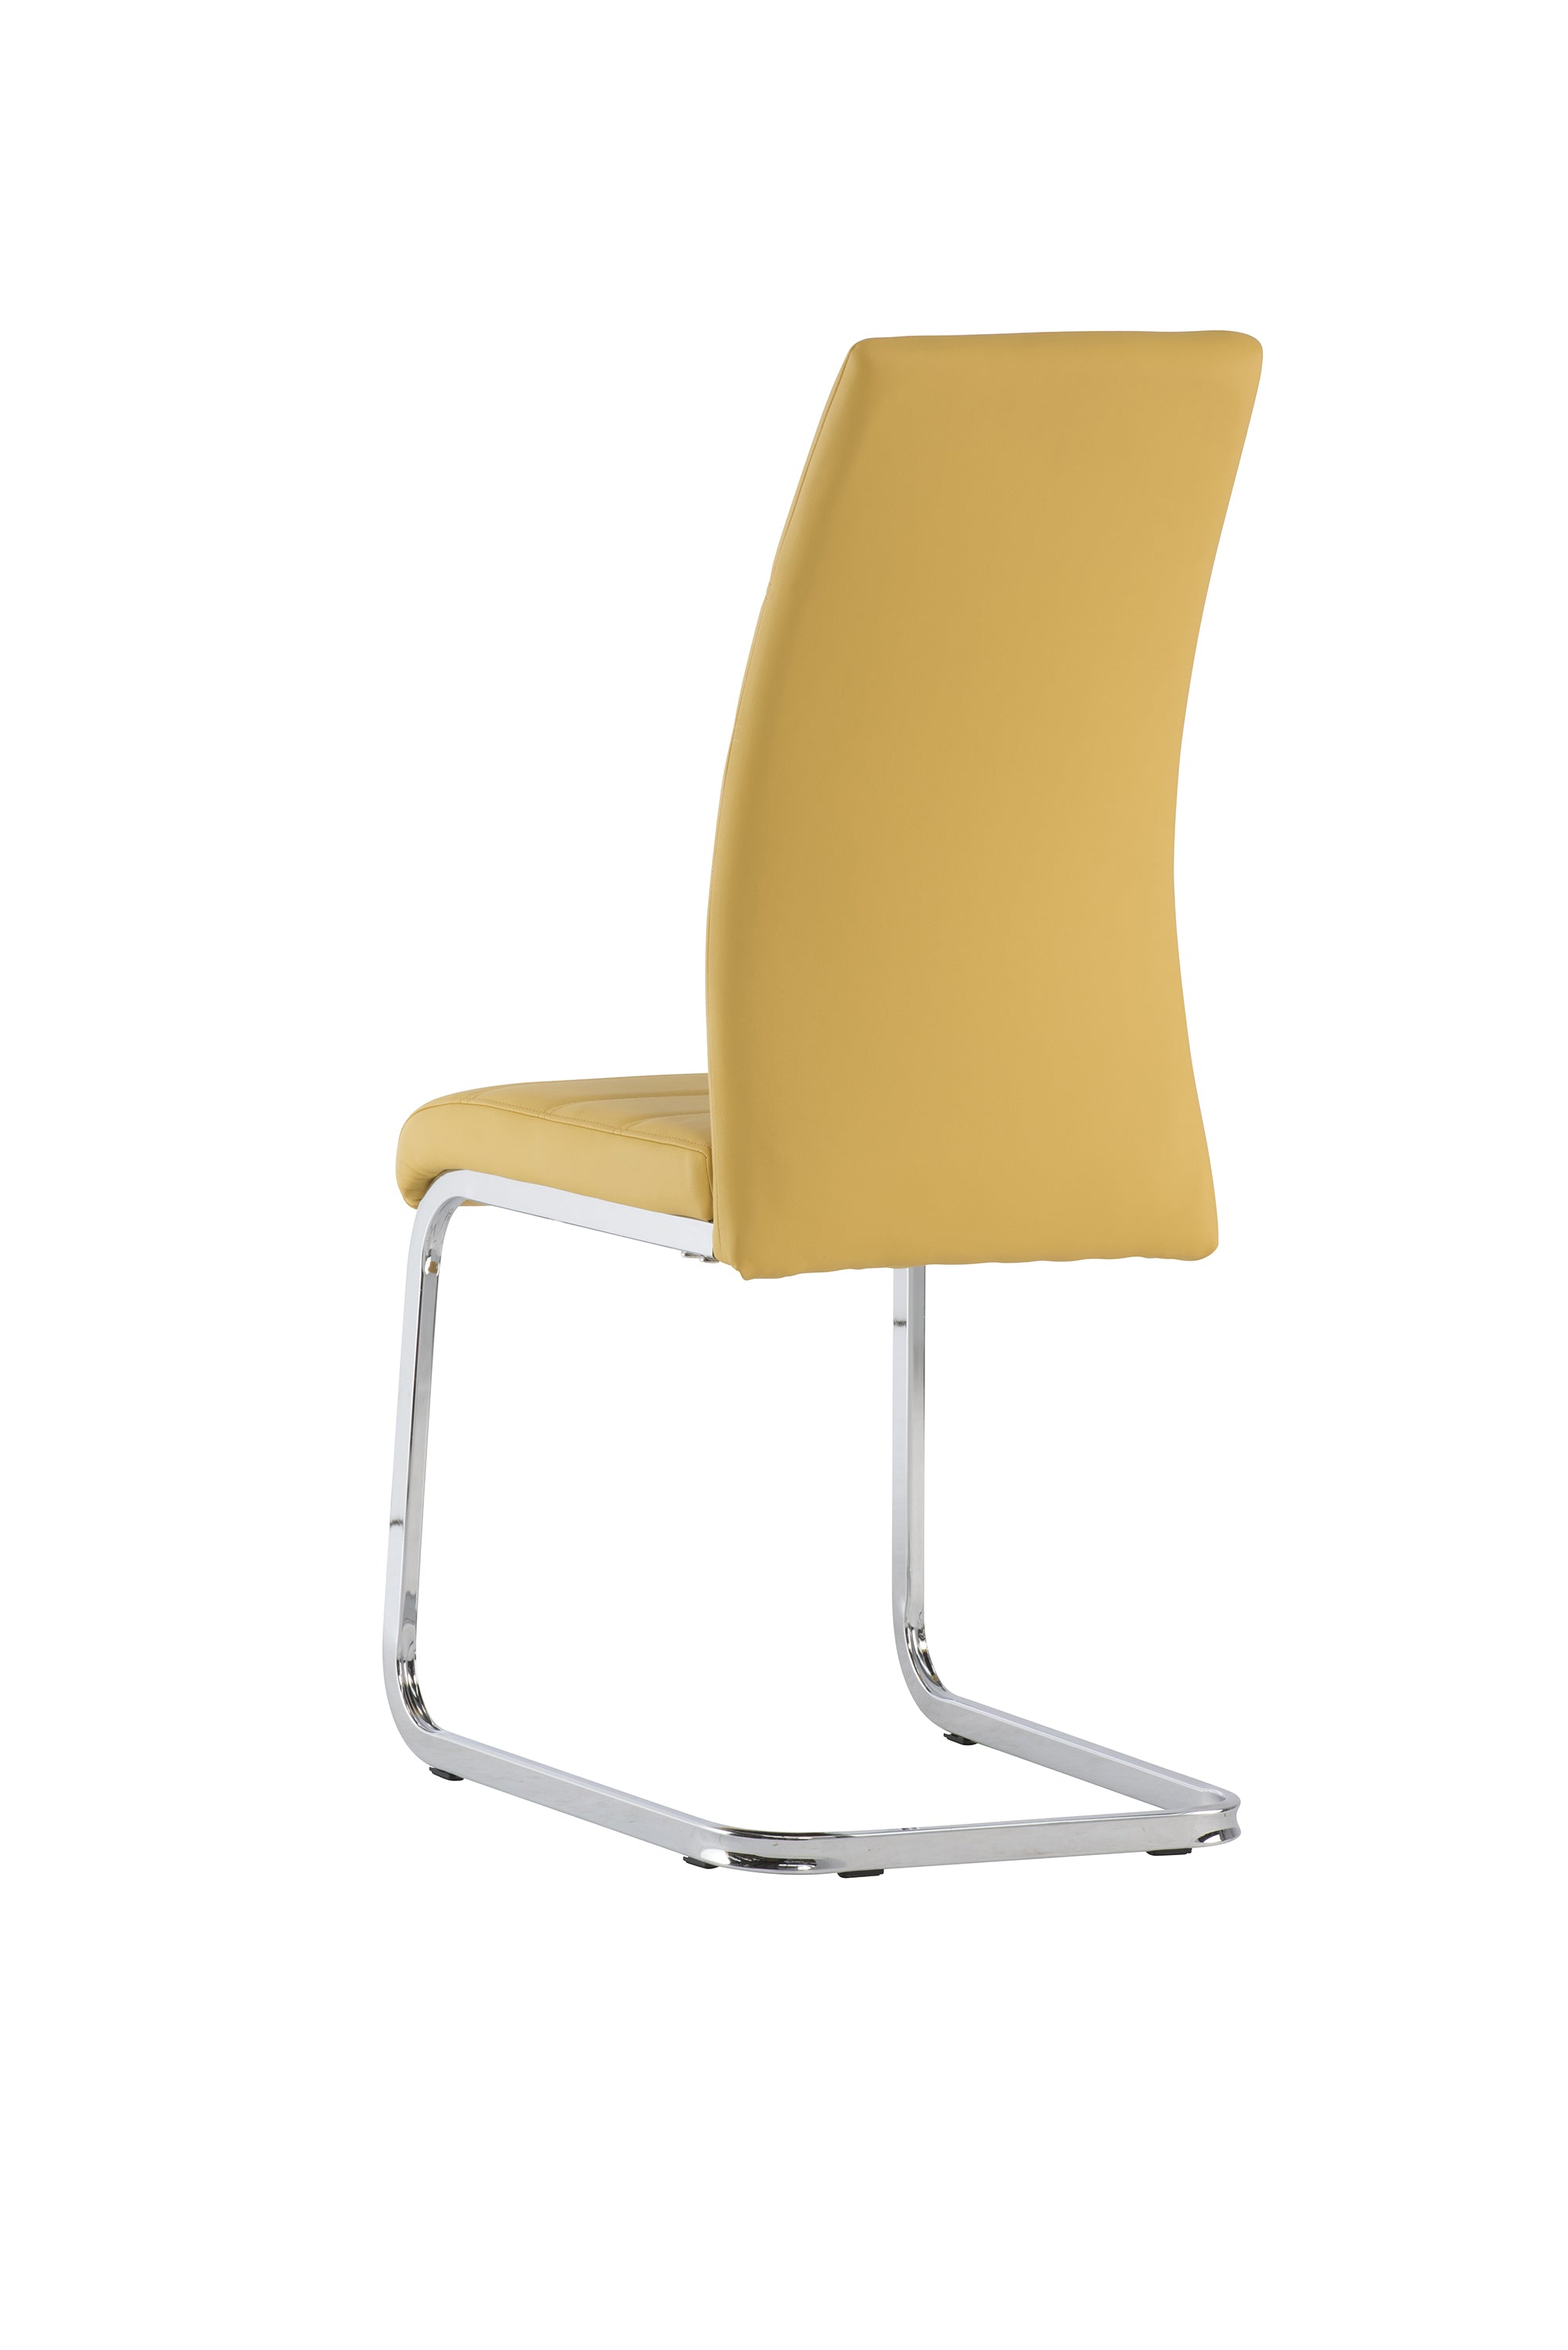 Soho Pu Cantilever Chairs (Pairs)